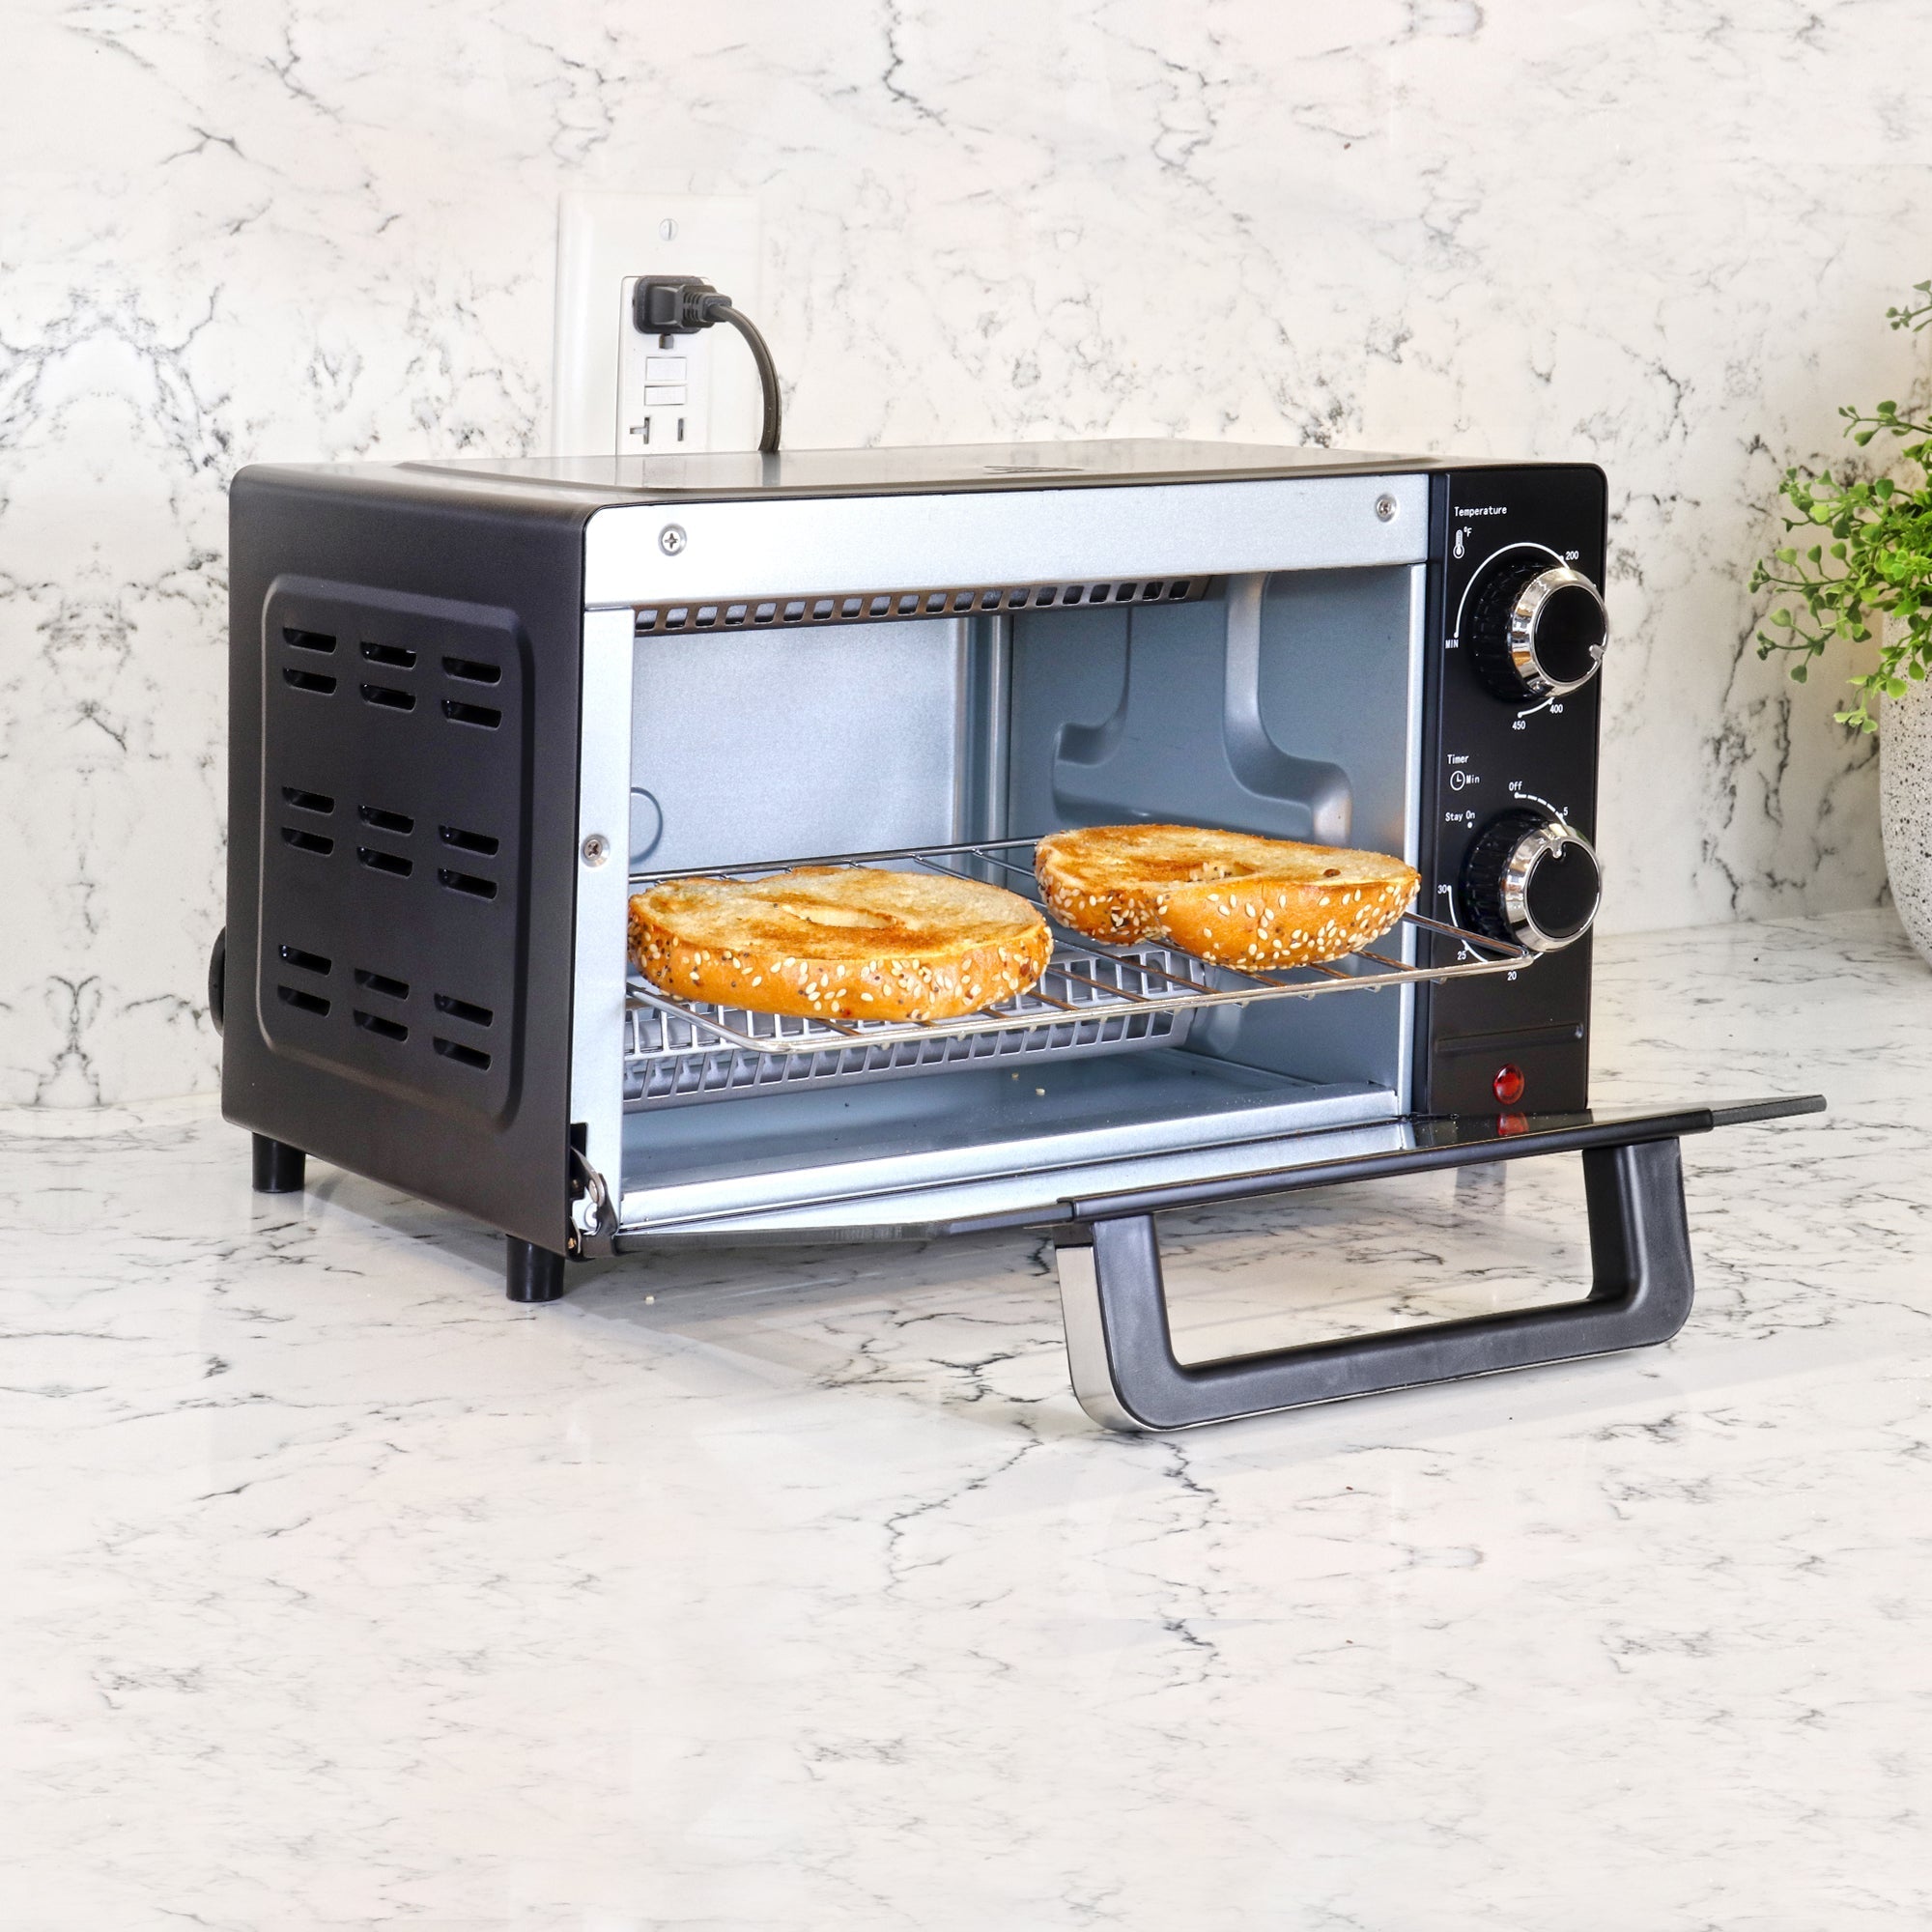 Lifestyle image of toaster oven with door open and two toasted bagel halves inside on a white marble counter with a white marble backsplash 